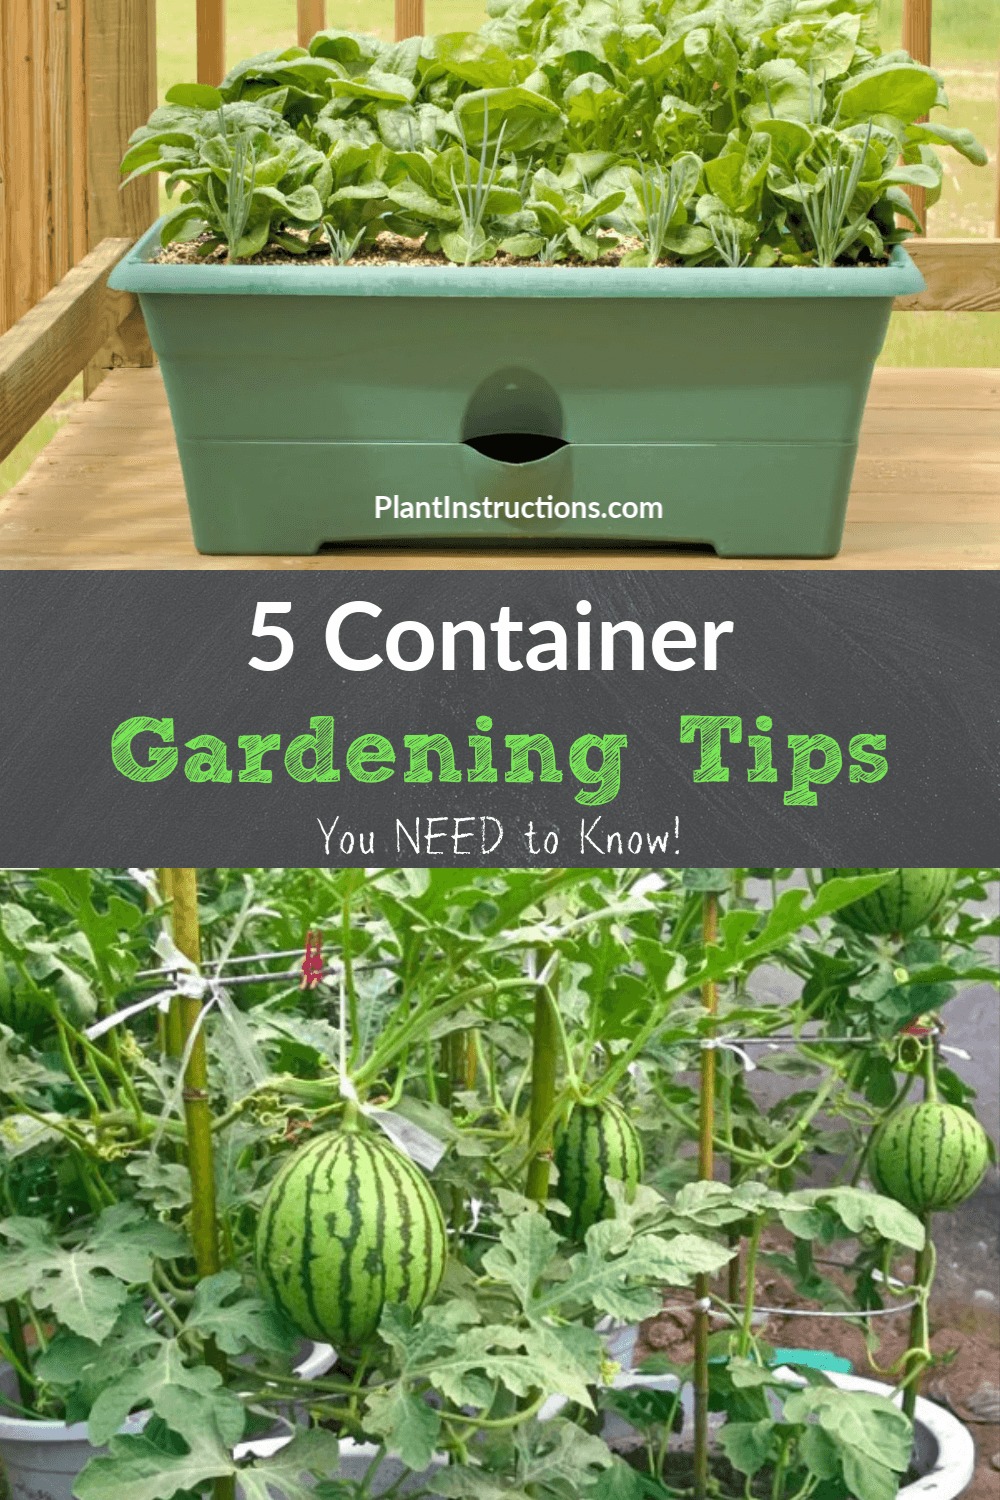 5 Container Gardening Tips - Plant Instructions